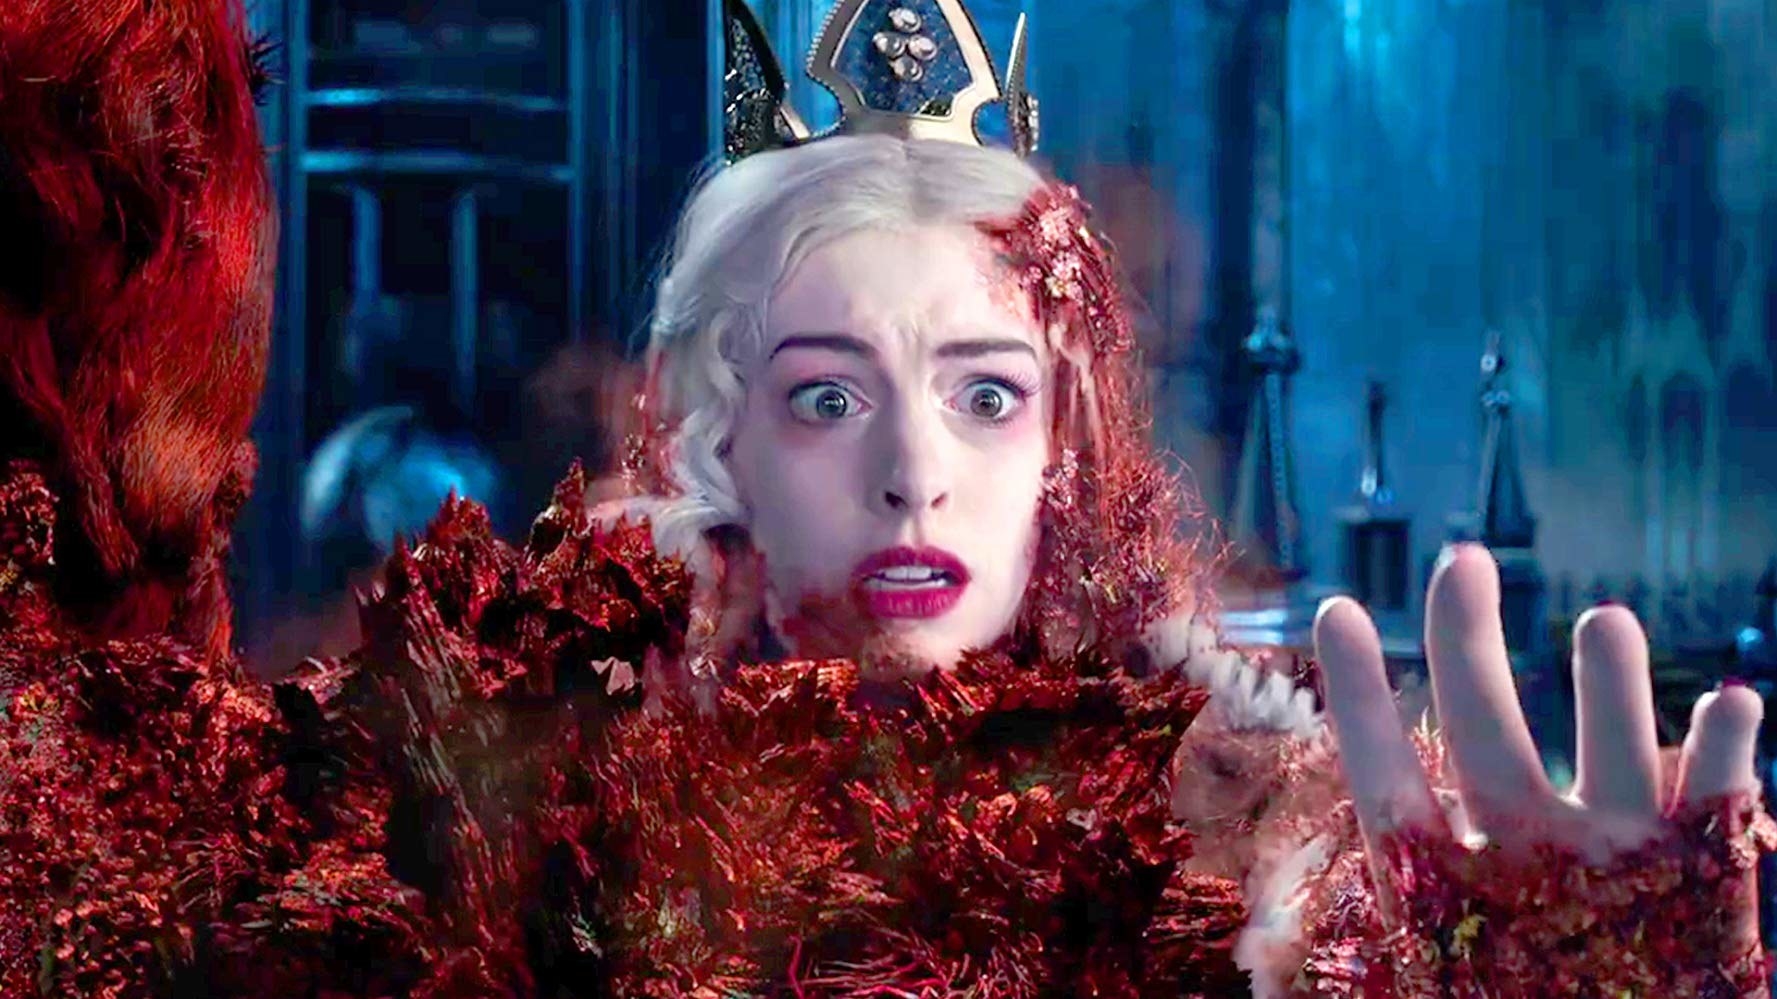 Anne Hathaway trapped in red stuff